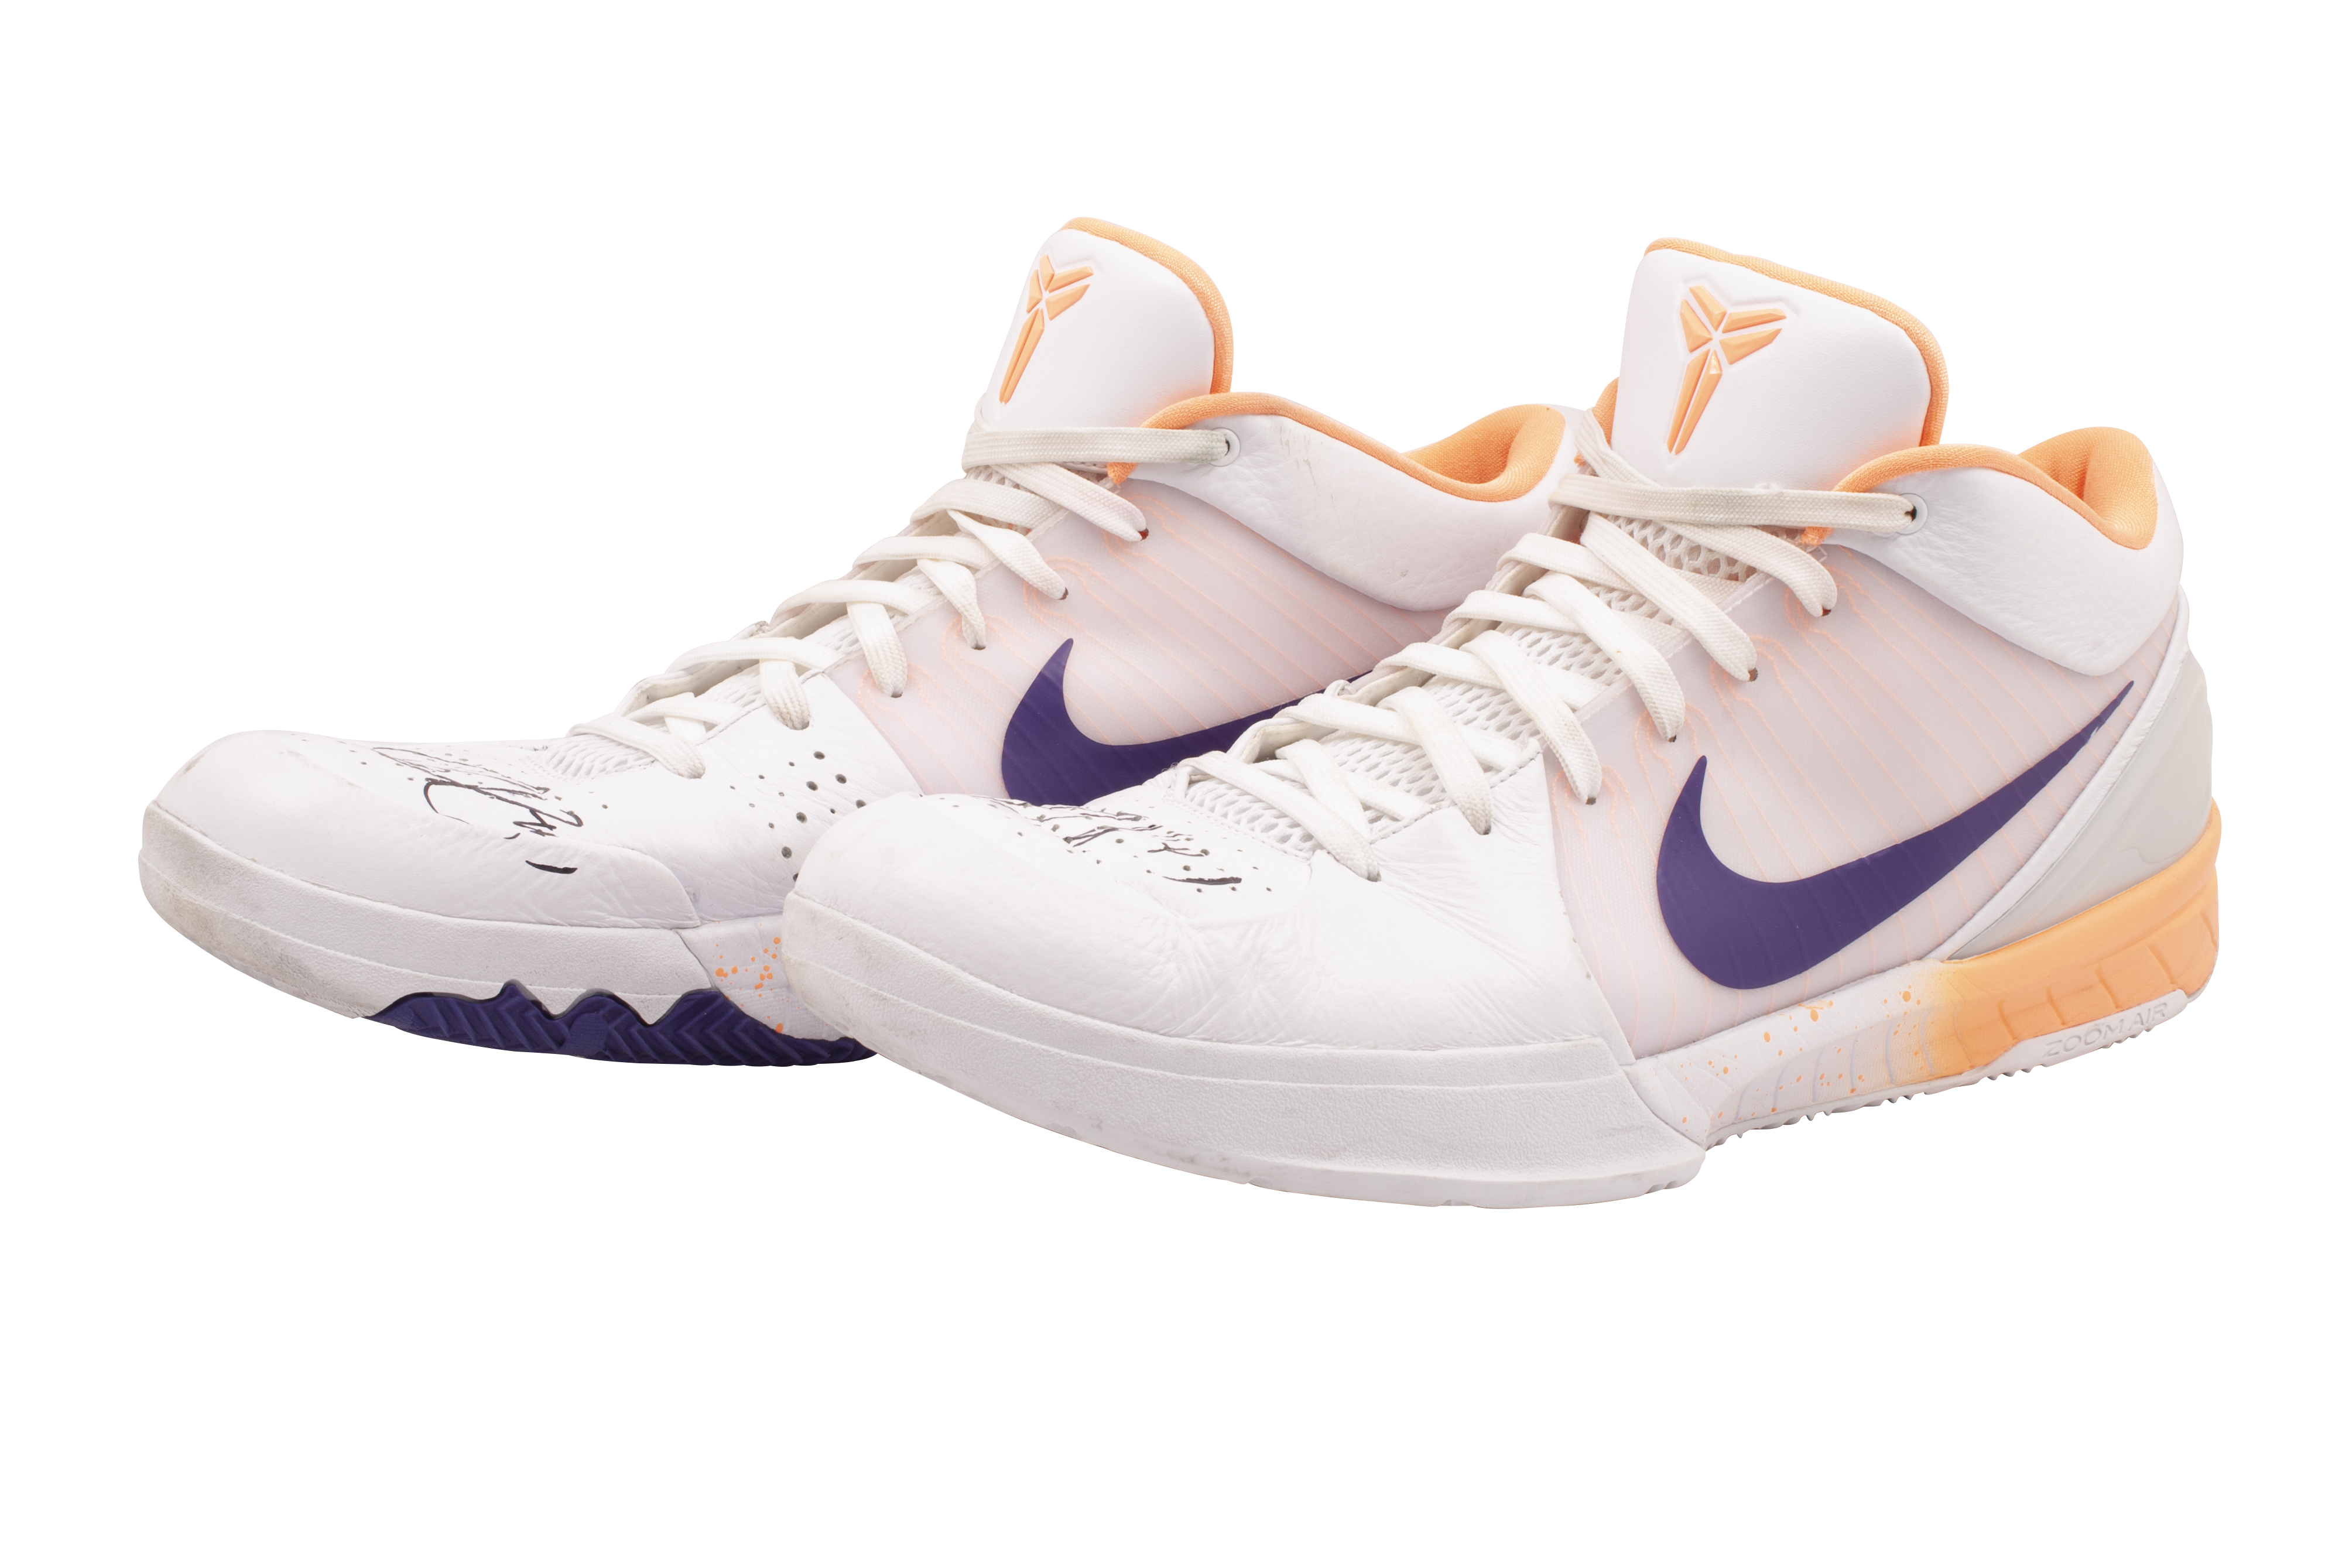 A detail view of the shoes worn by Phoenix Suns guard Devin Booker